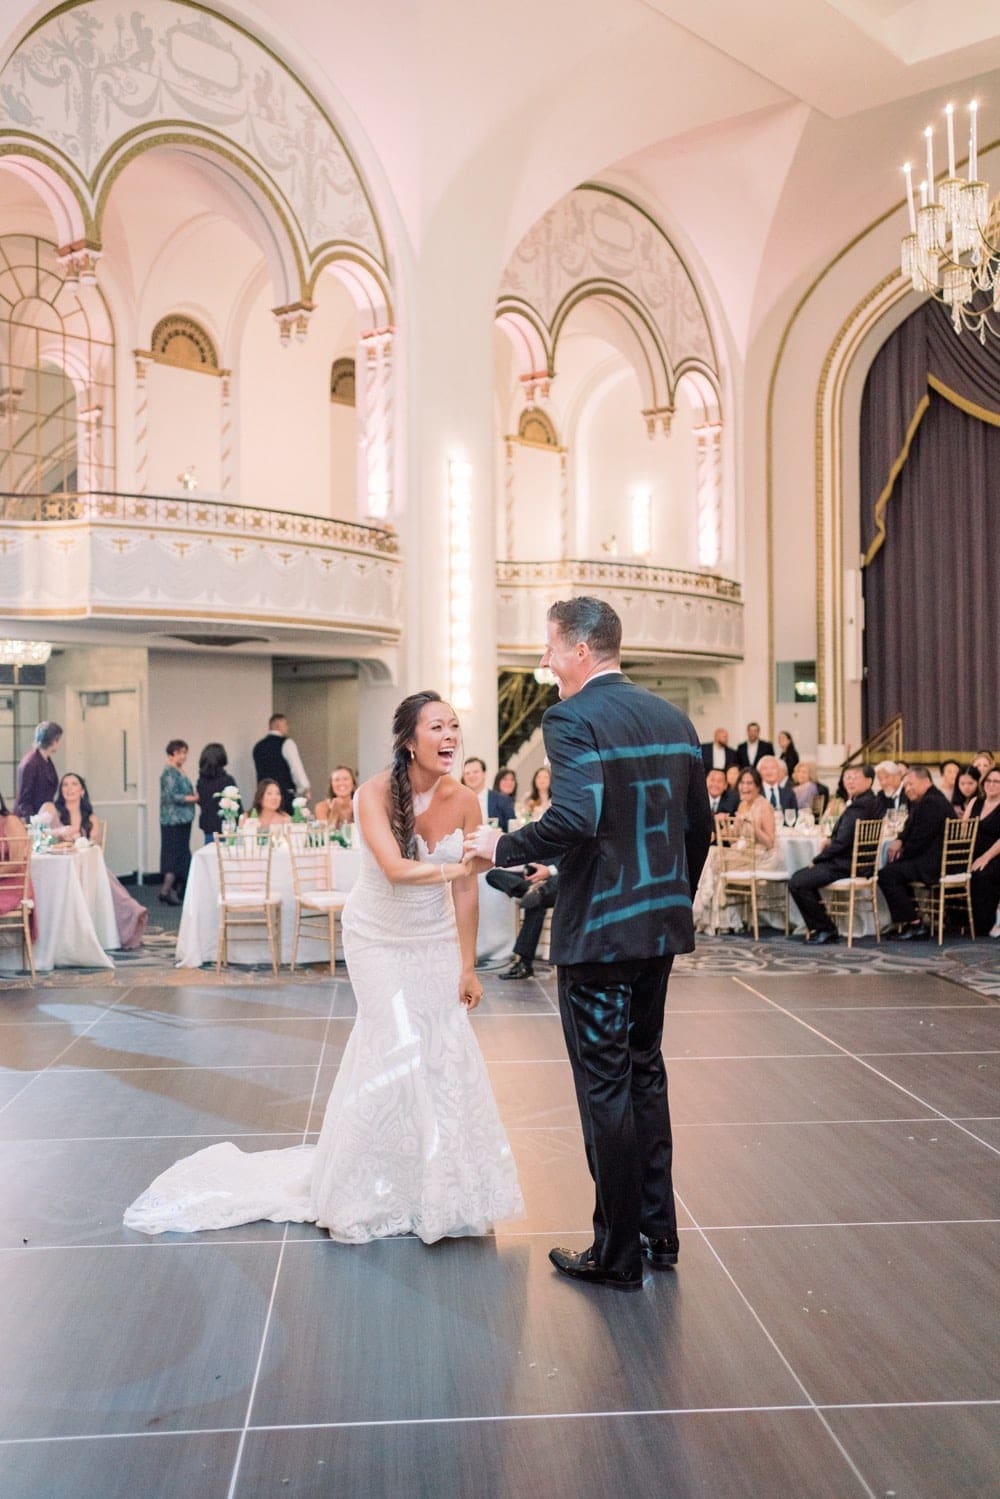 Bride and groom playfully sharing laughs on the dance floor as they prepare to dance, taken by Marcela Diaz Photography